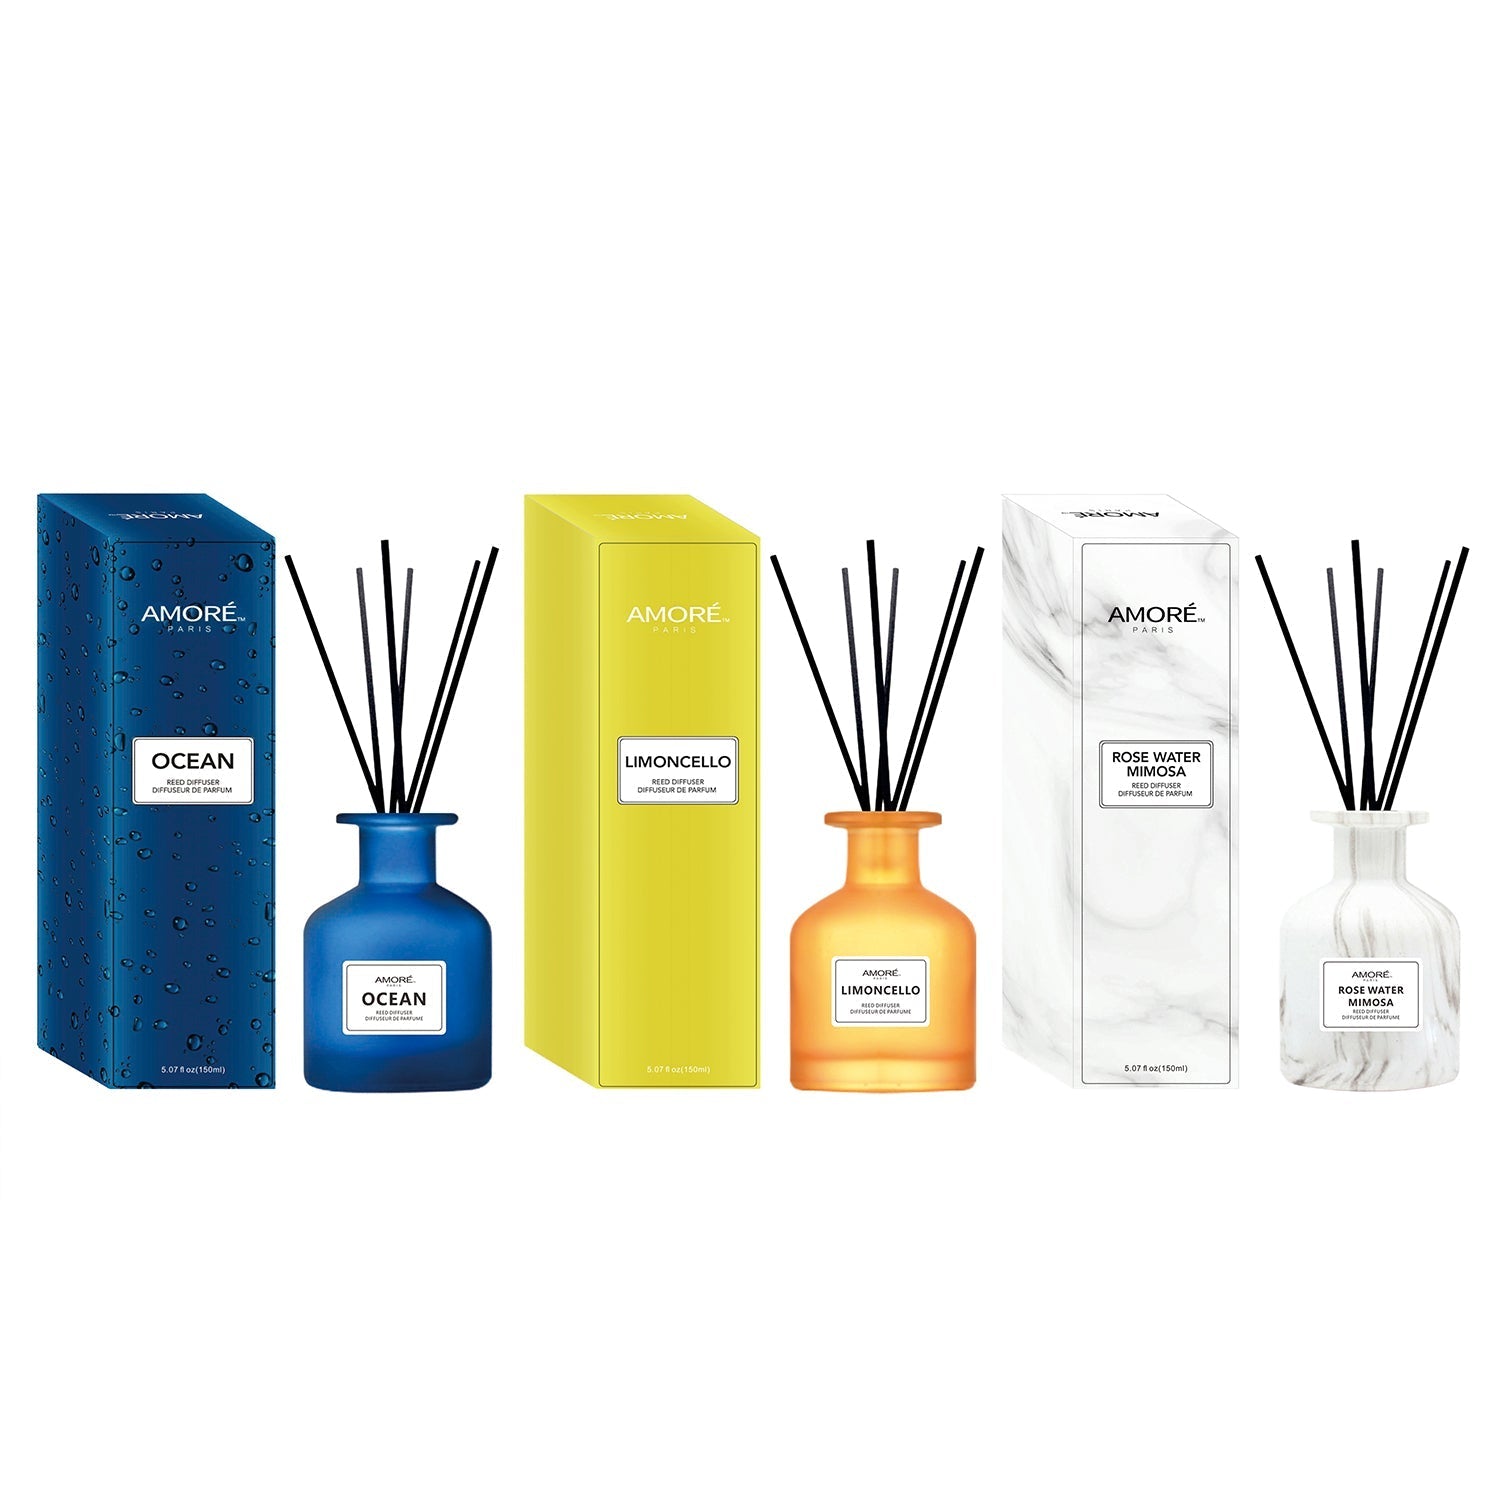 Premium Reed Diffusers And Air Freshener For Aesthetic Home Decor - 5.07 fl Oz (150ml)